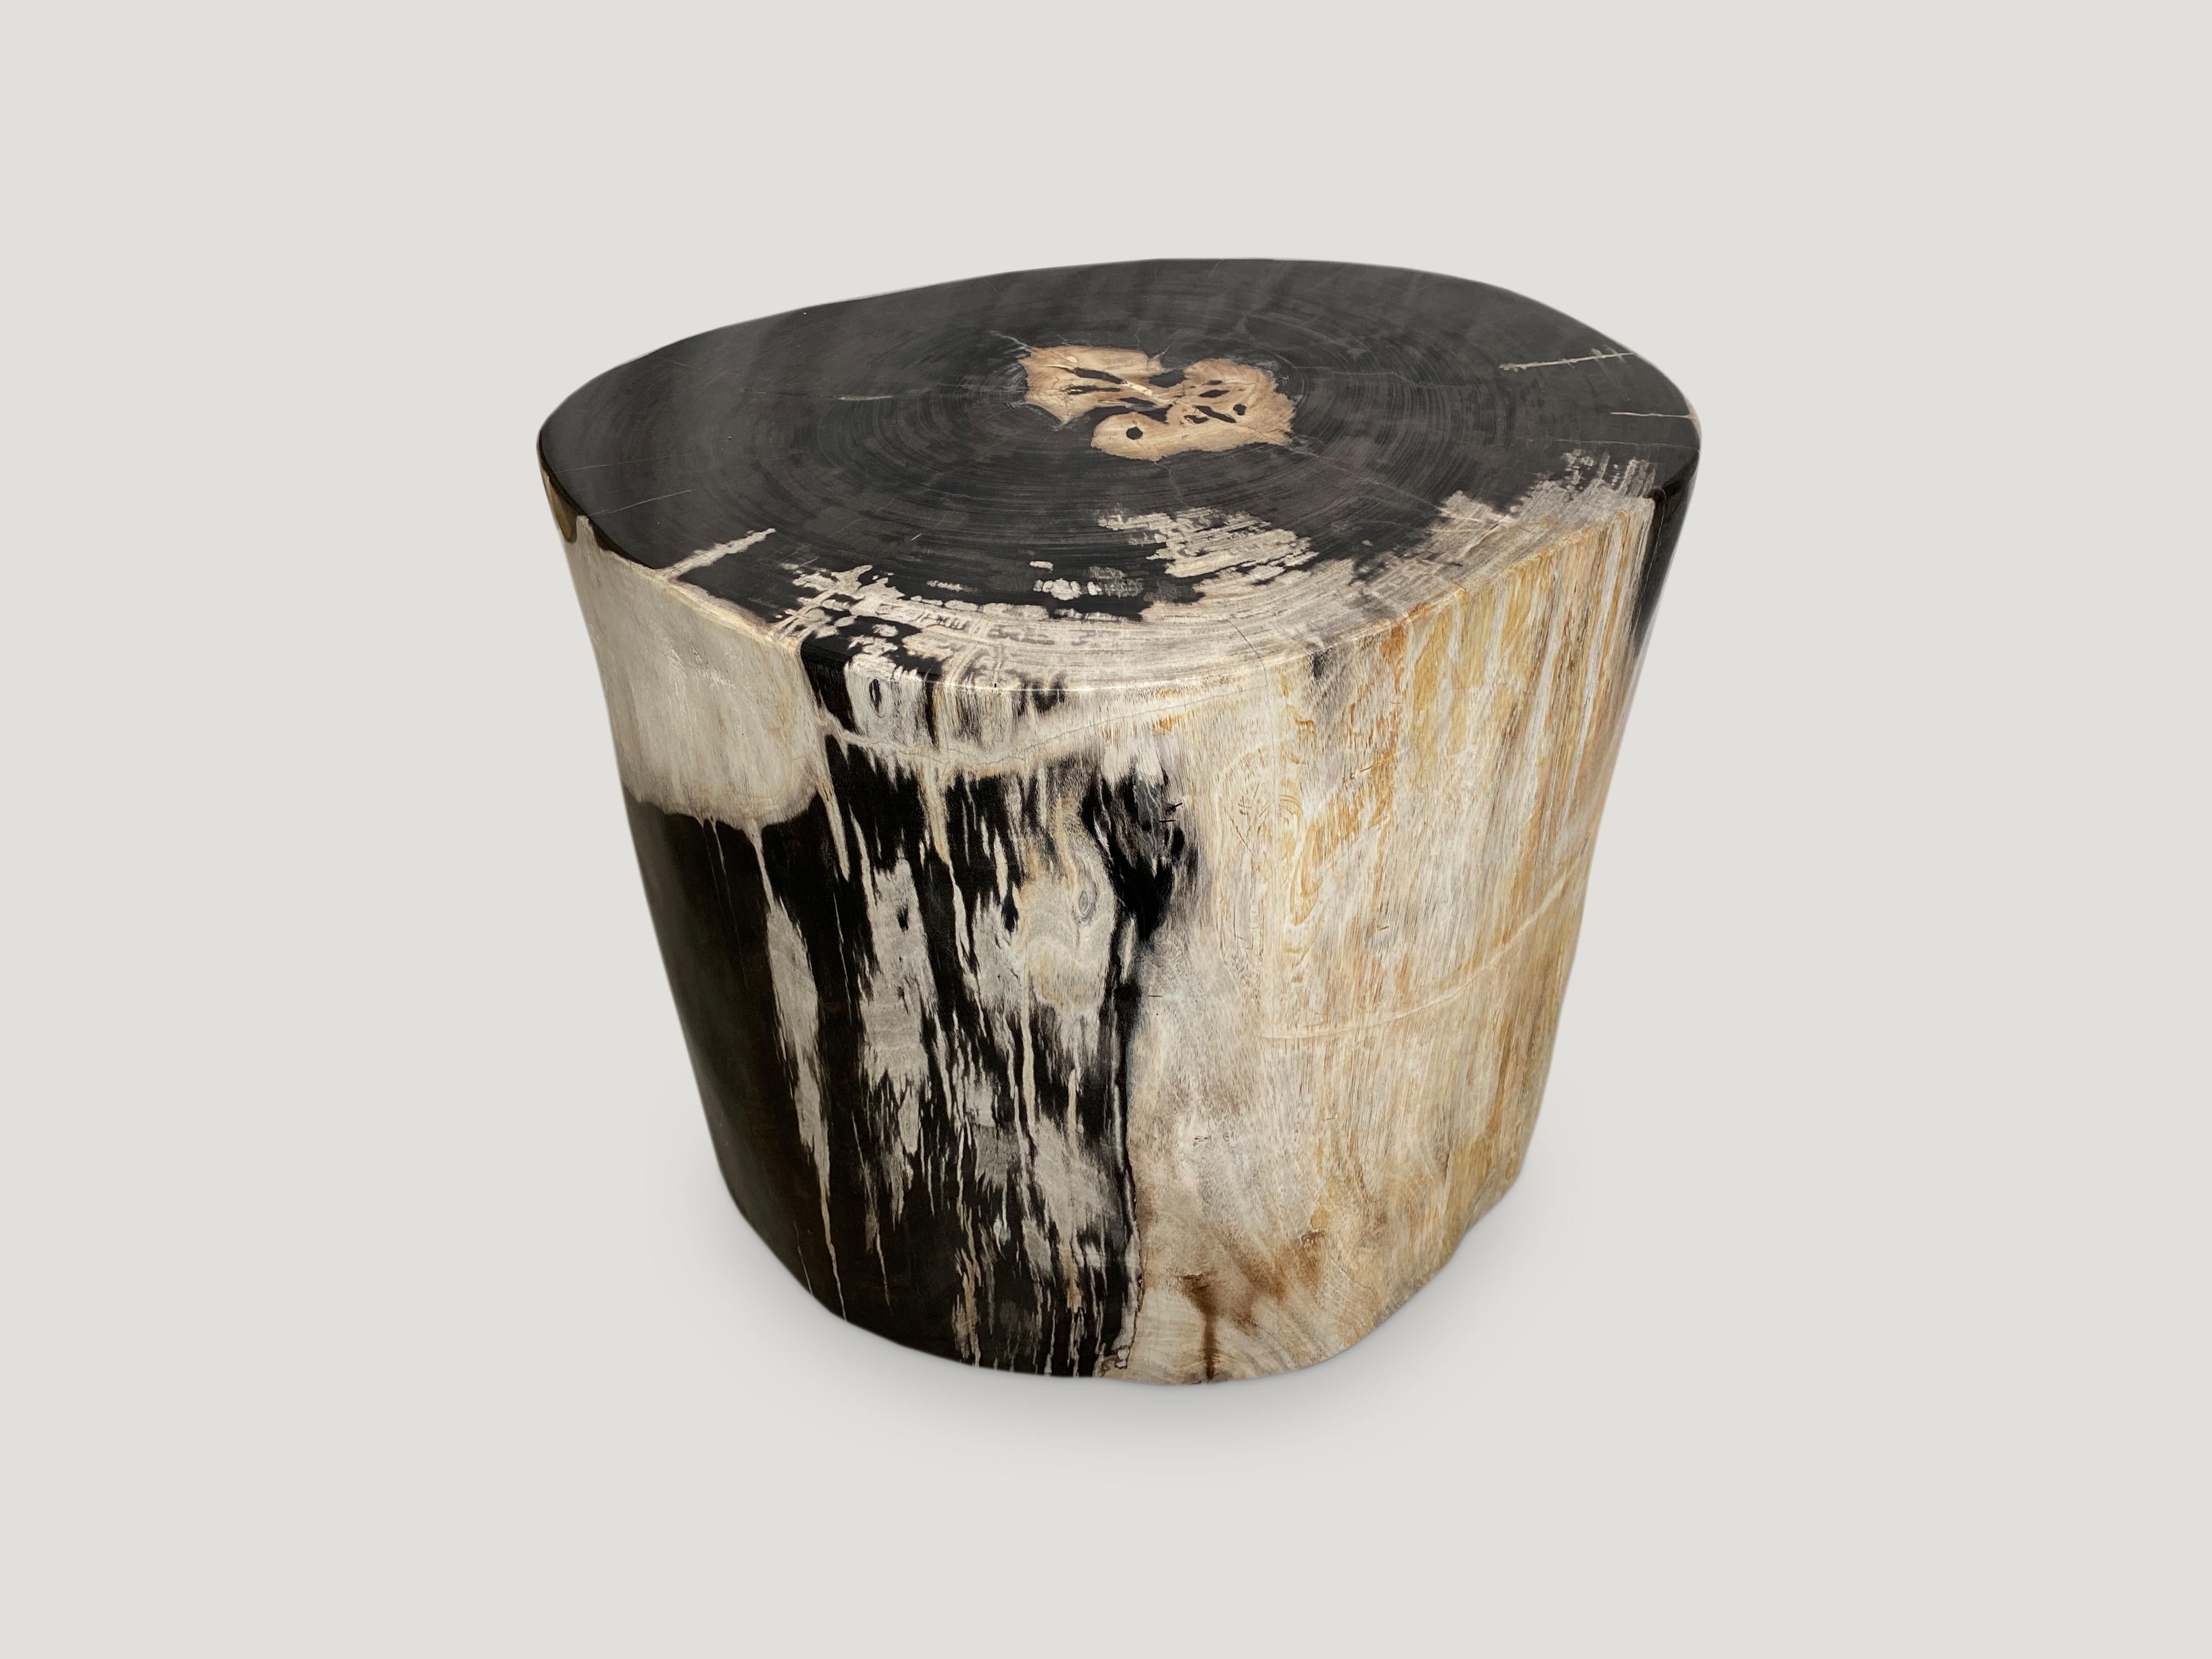 Impressive oversized high quality petrified wood side table with dramatic contrasting tones. It’s fascinating how Mother Nature produces these exquisite 40 million year old petrified teak logs with such contrasting colors with natural patterns